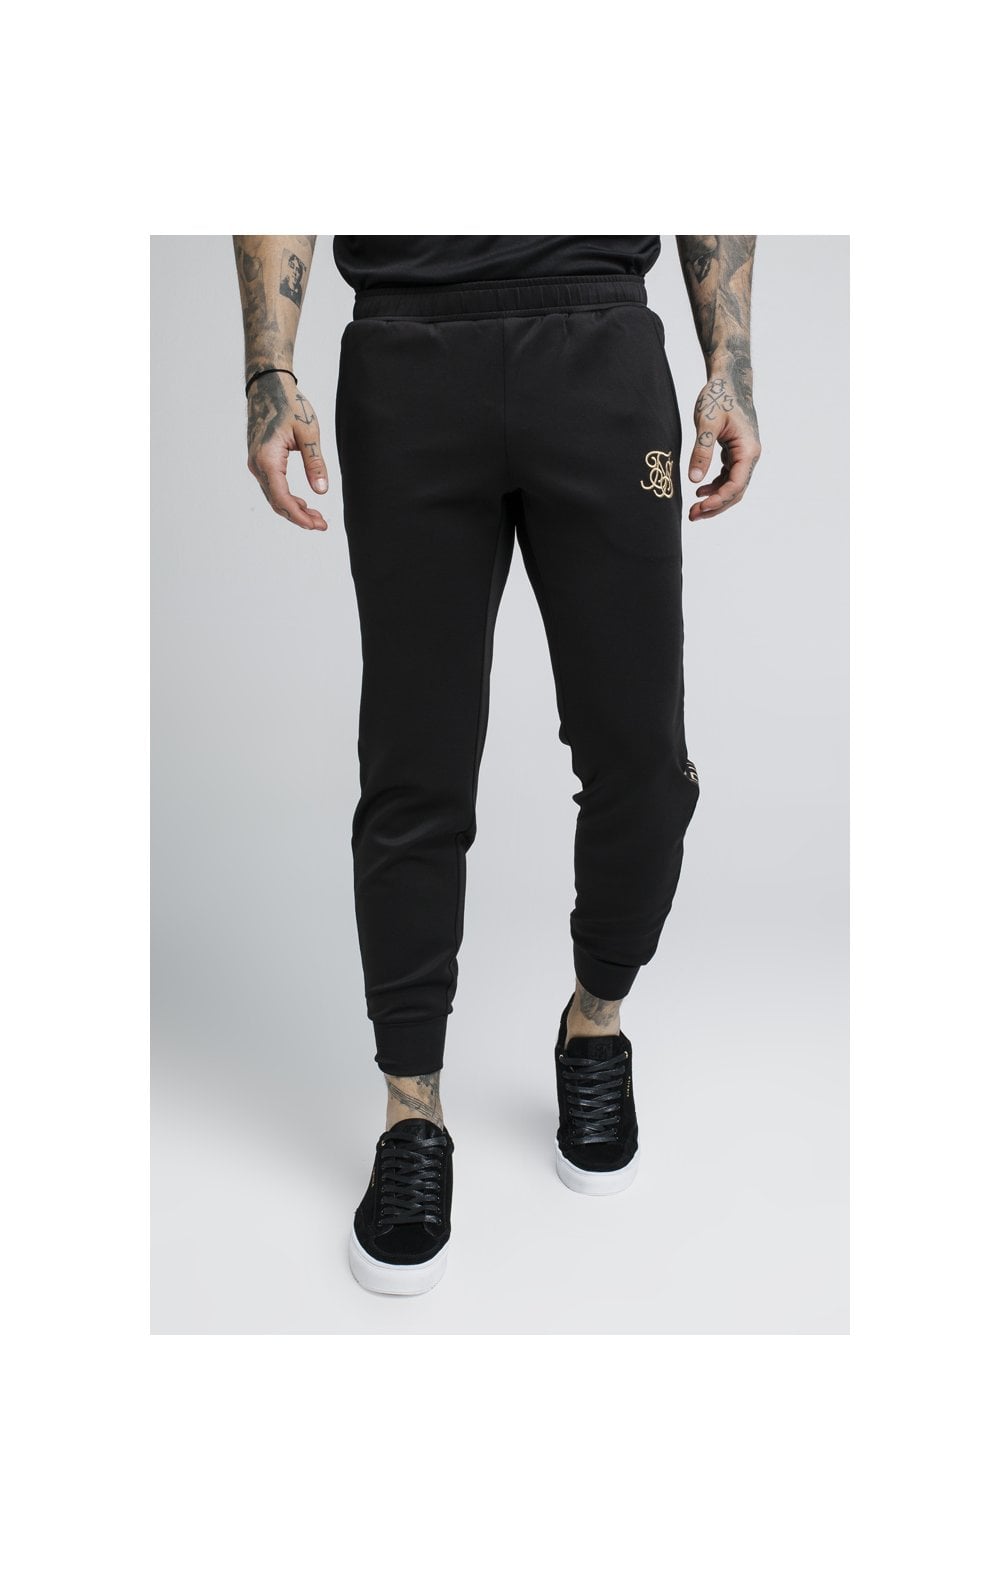 Load image into Gallery viewer, SikSilk Cartel Cropped Cuffed Track Pants - Black (1)